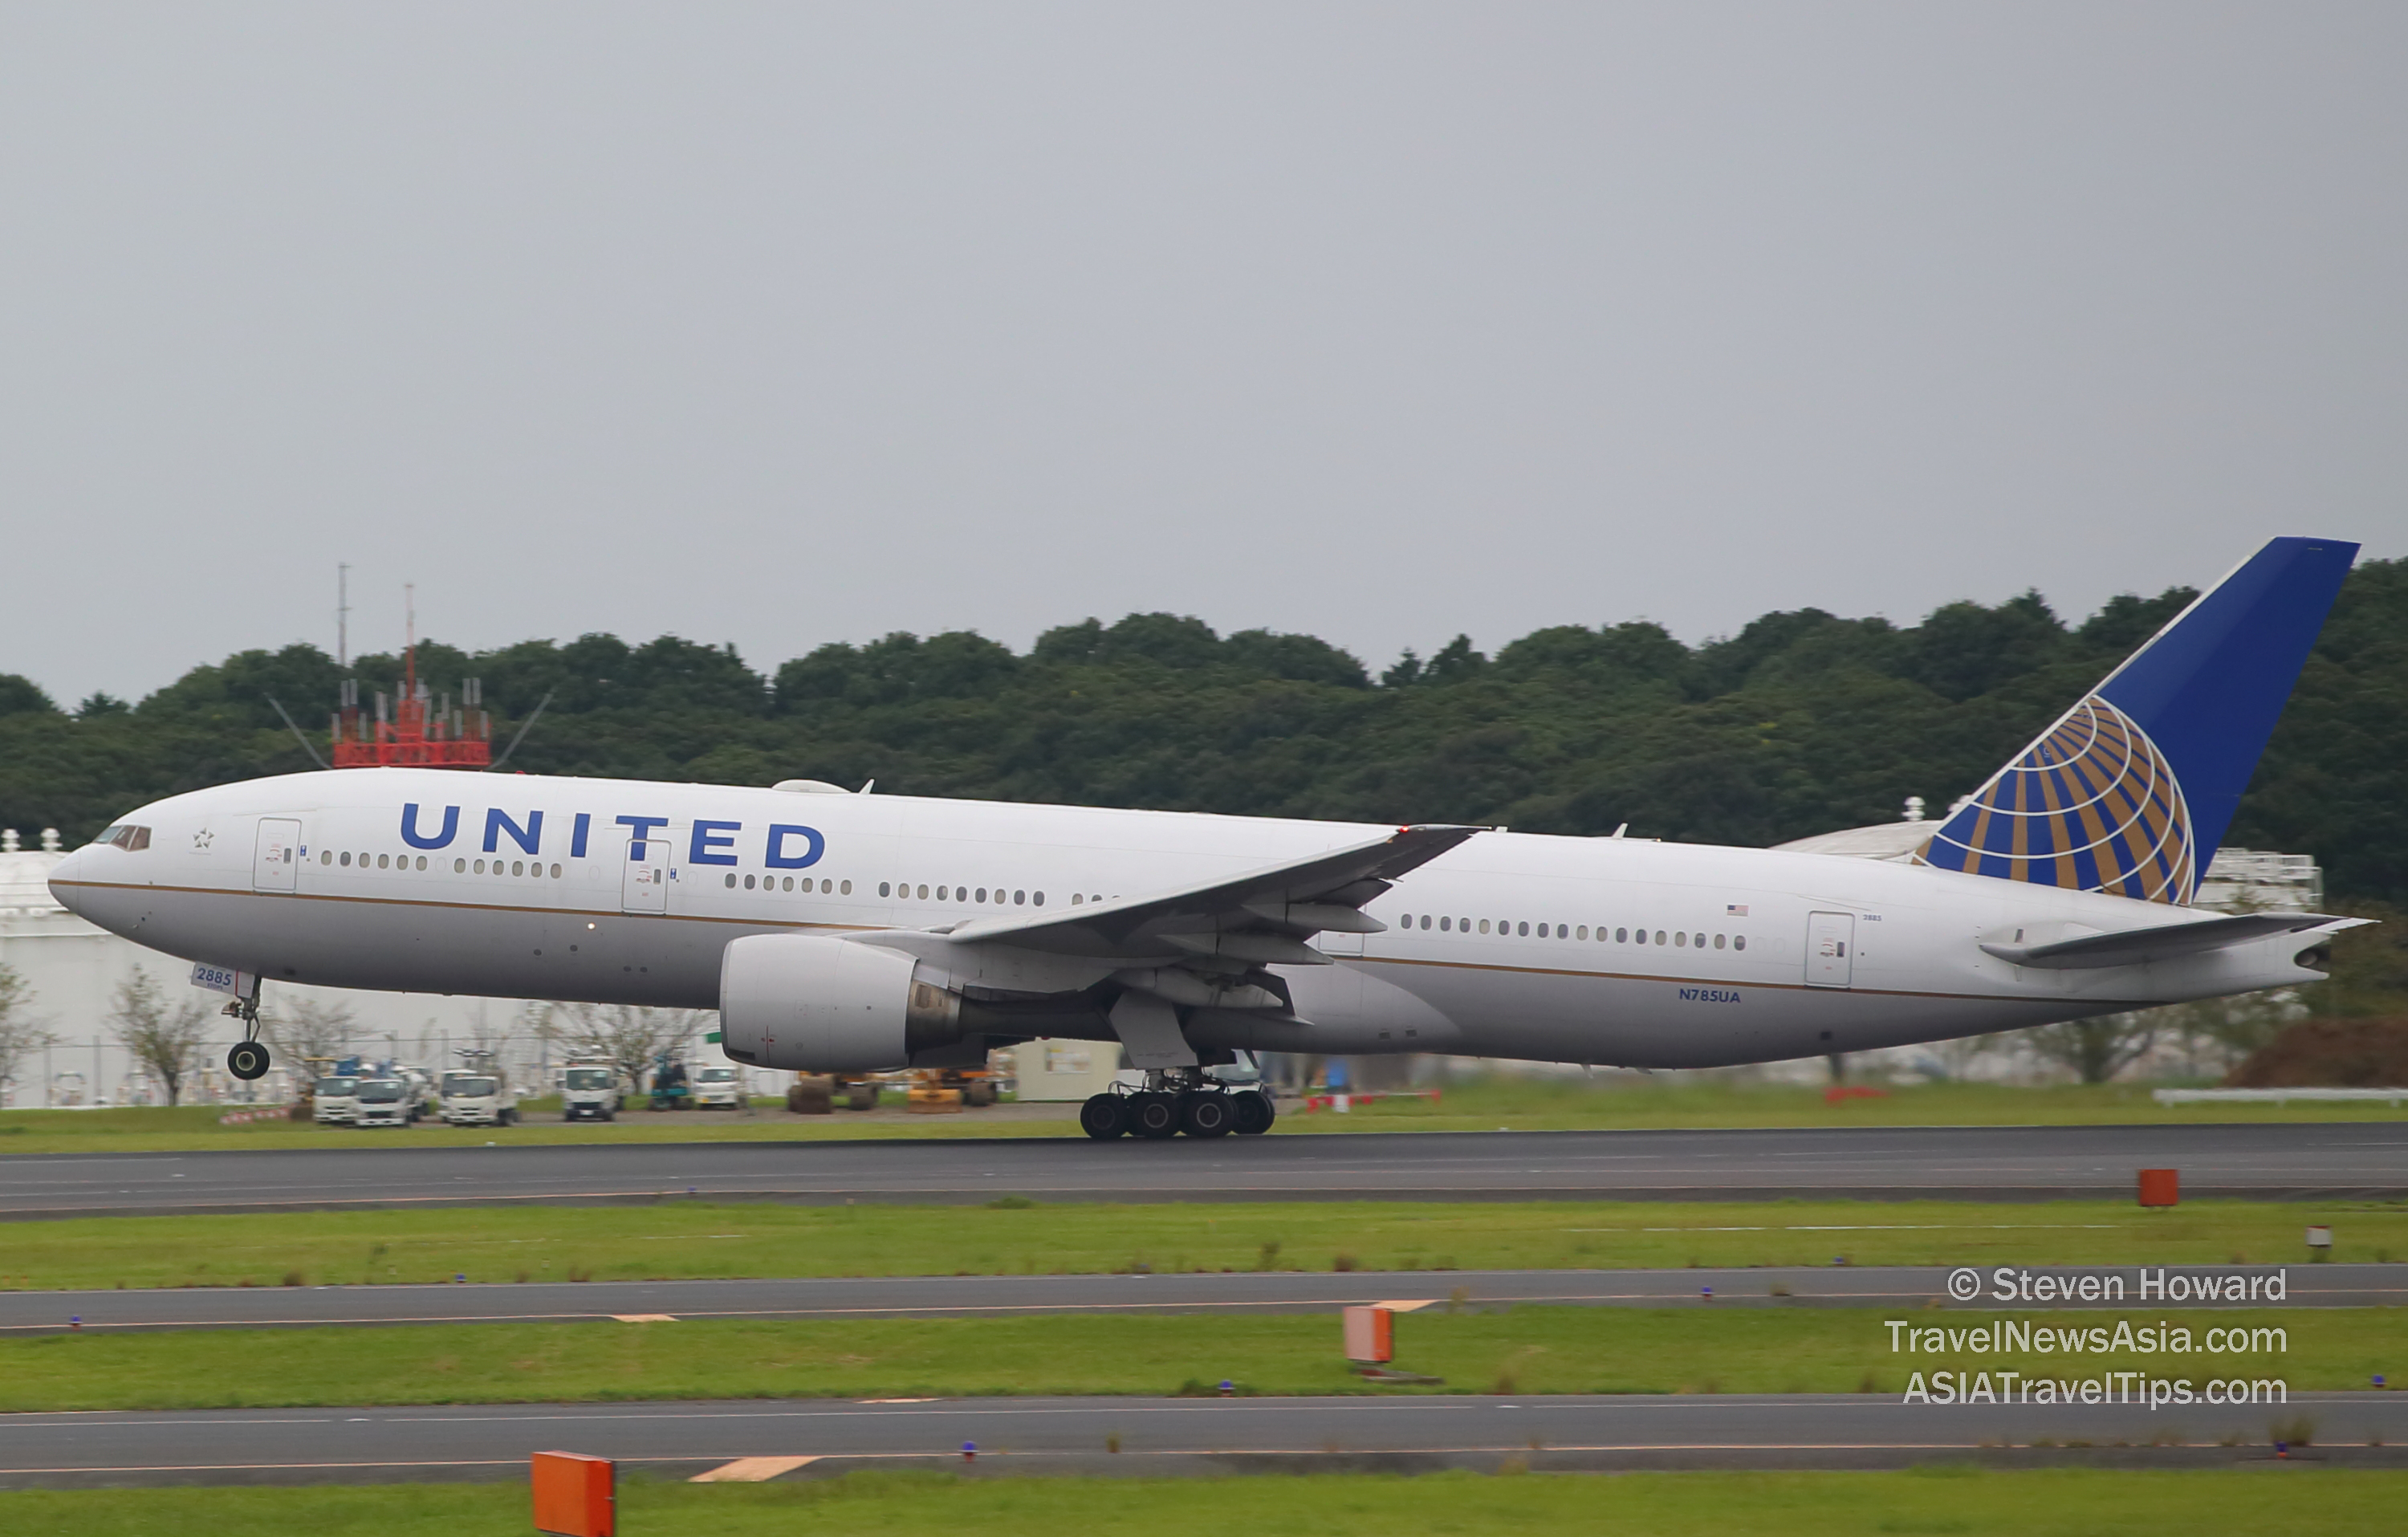 United Airlines Boeing 777 reg: N785UA powered by two Pratt & Whitney PW PW4090 engines at Narita Airport in Japan in 2019. Picture by Steven Howard of TravelNewsAsia.com Click to enlarge.